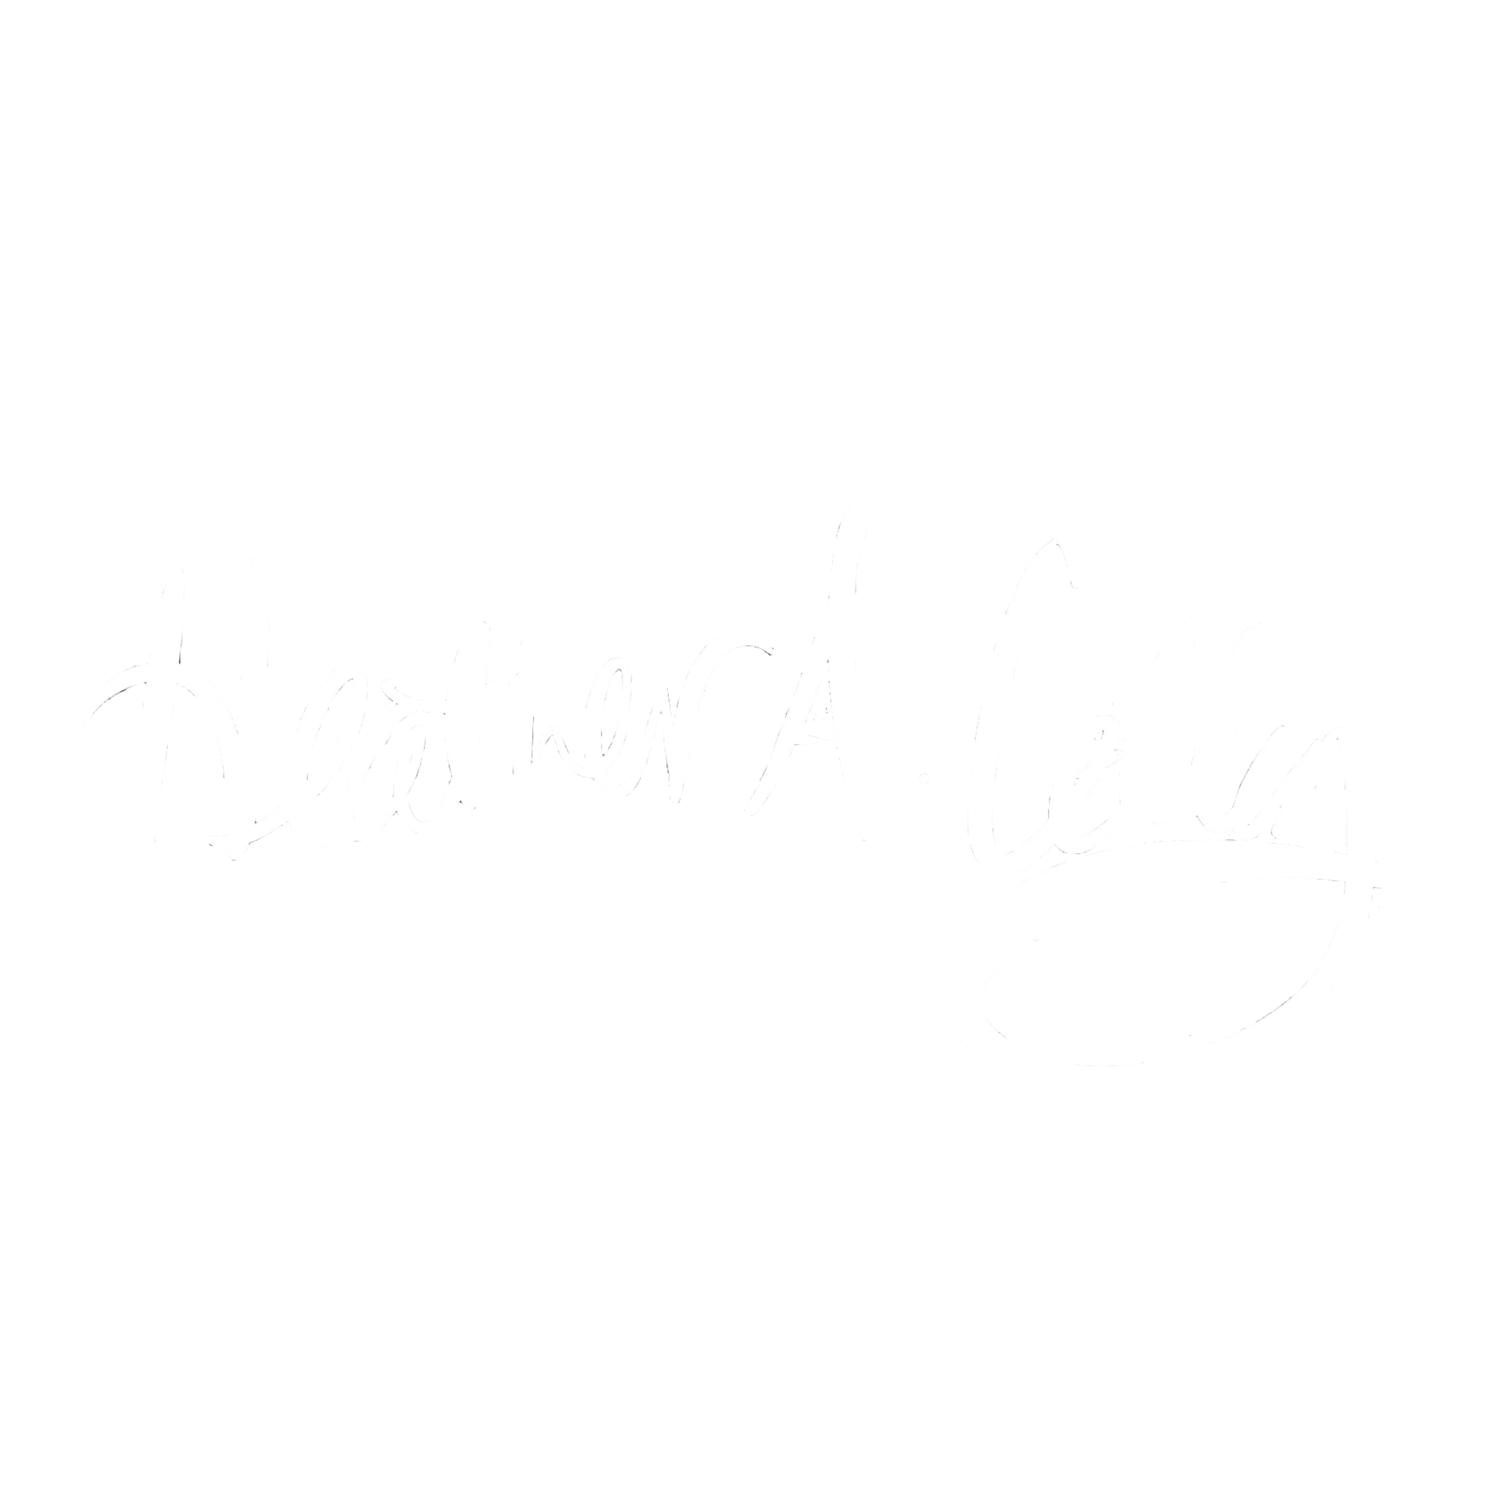 Heather A. Colby Photography